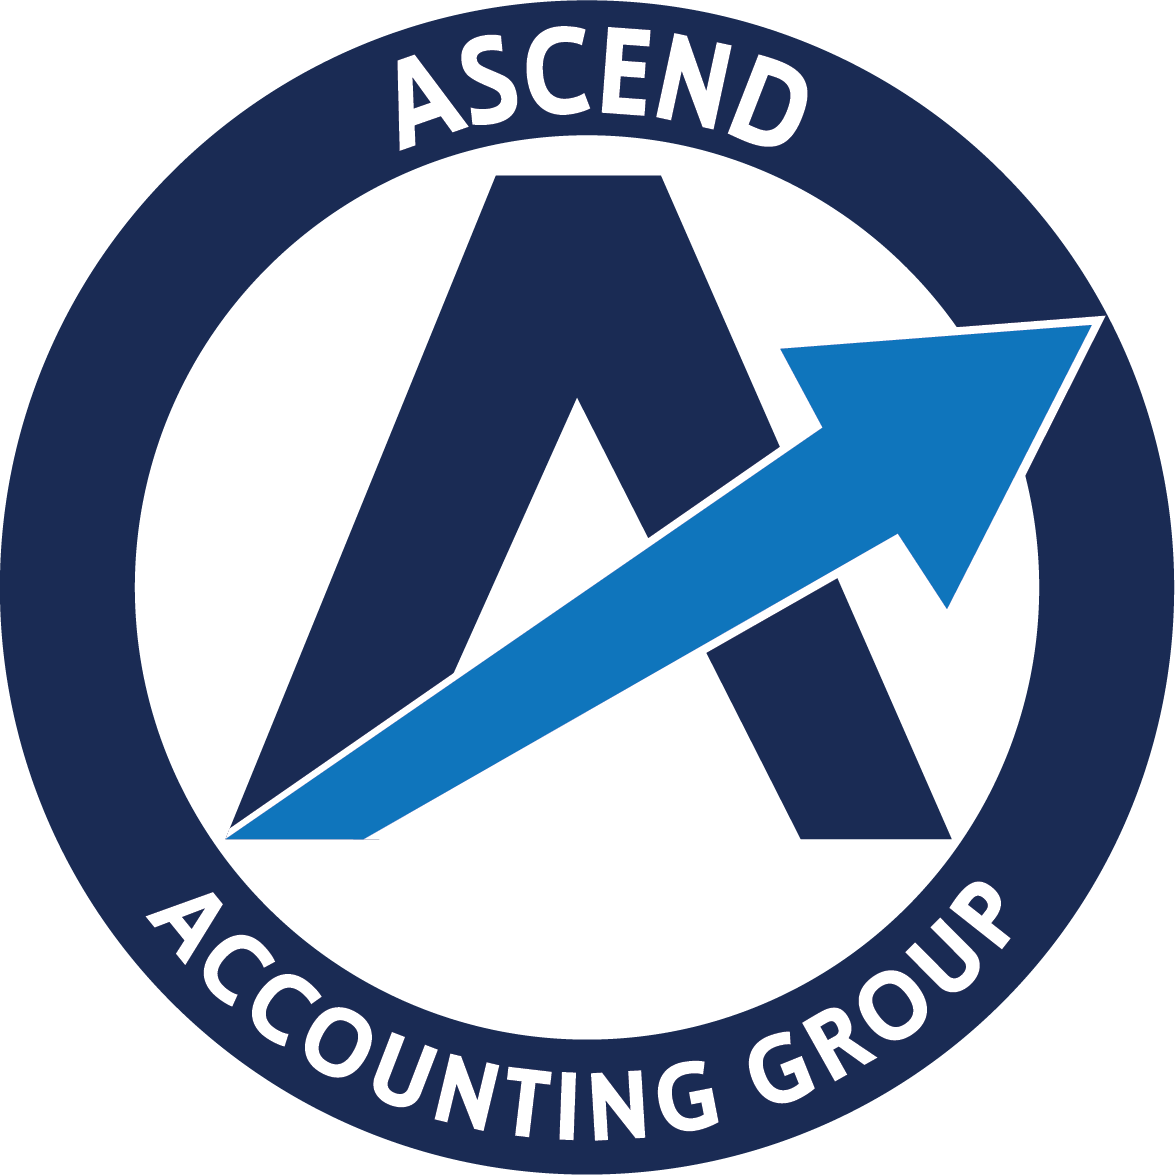 Ascend Accounting Group